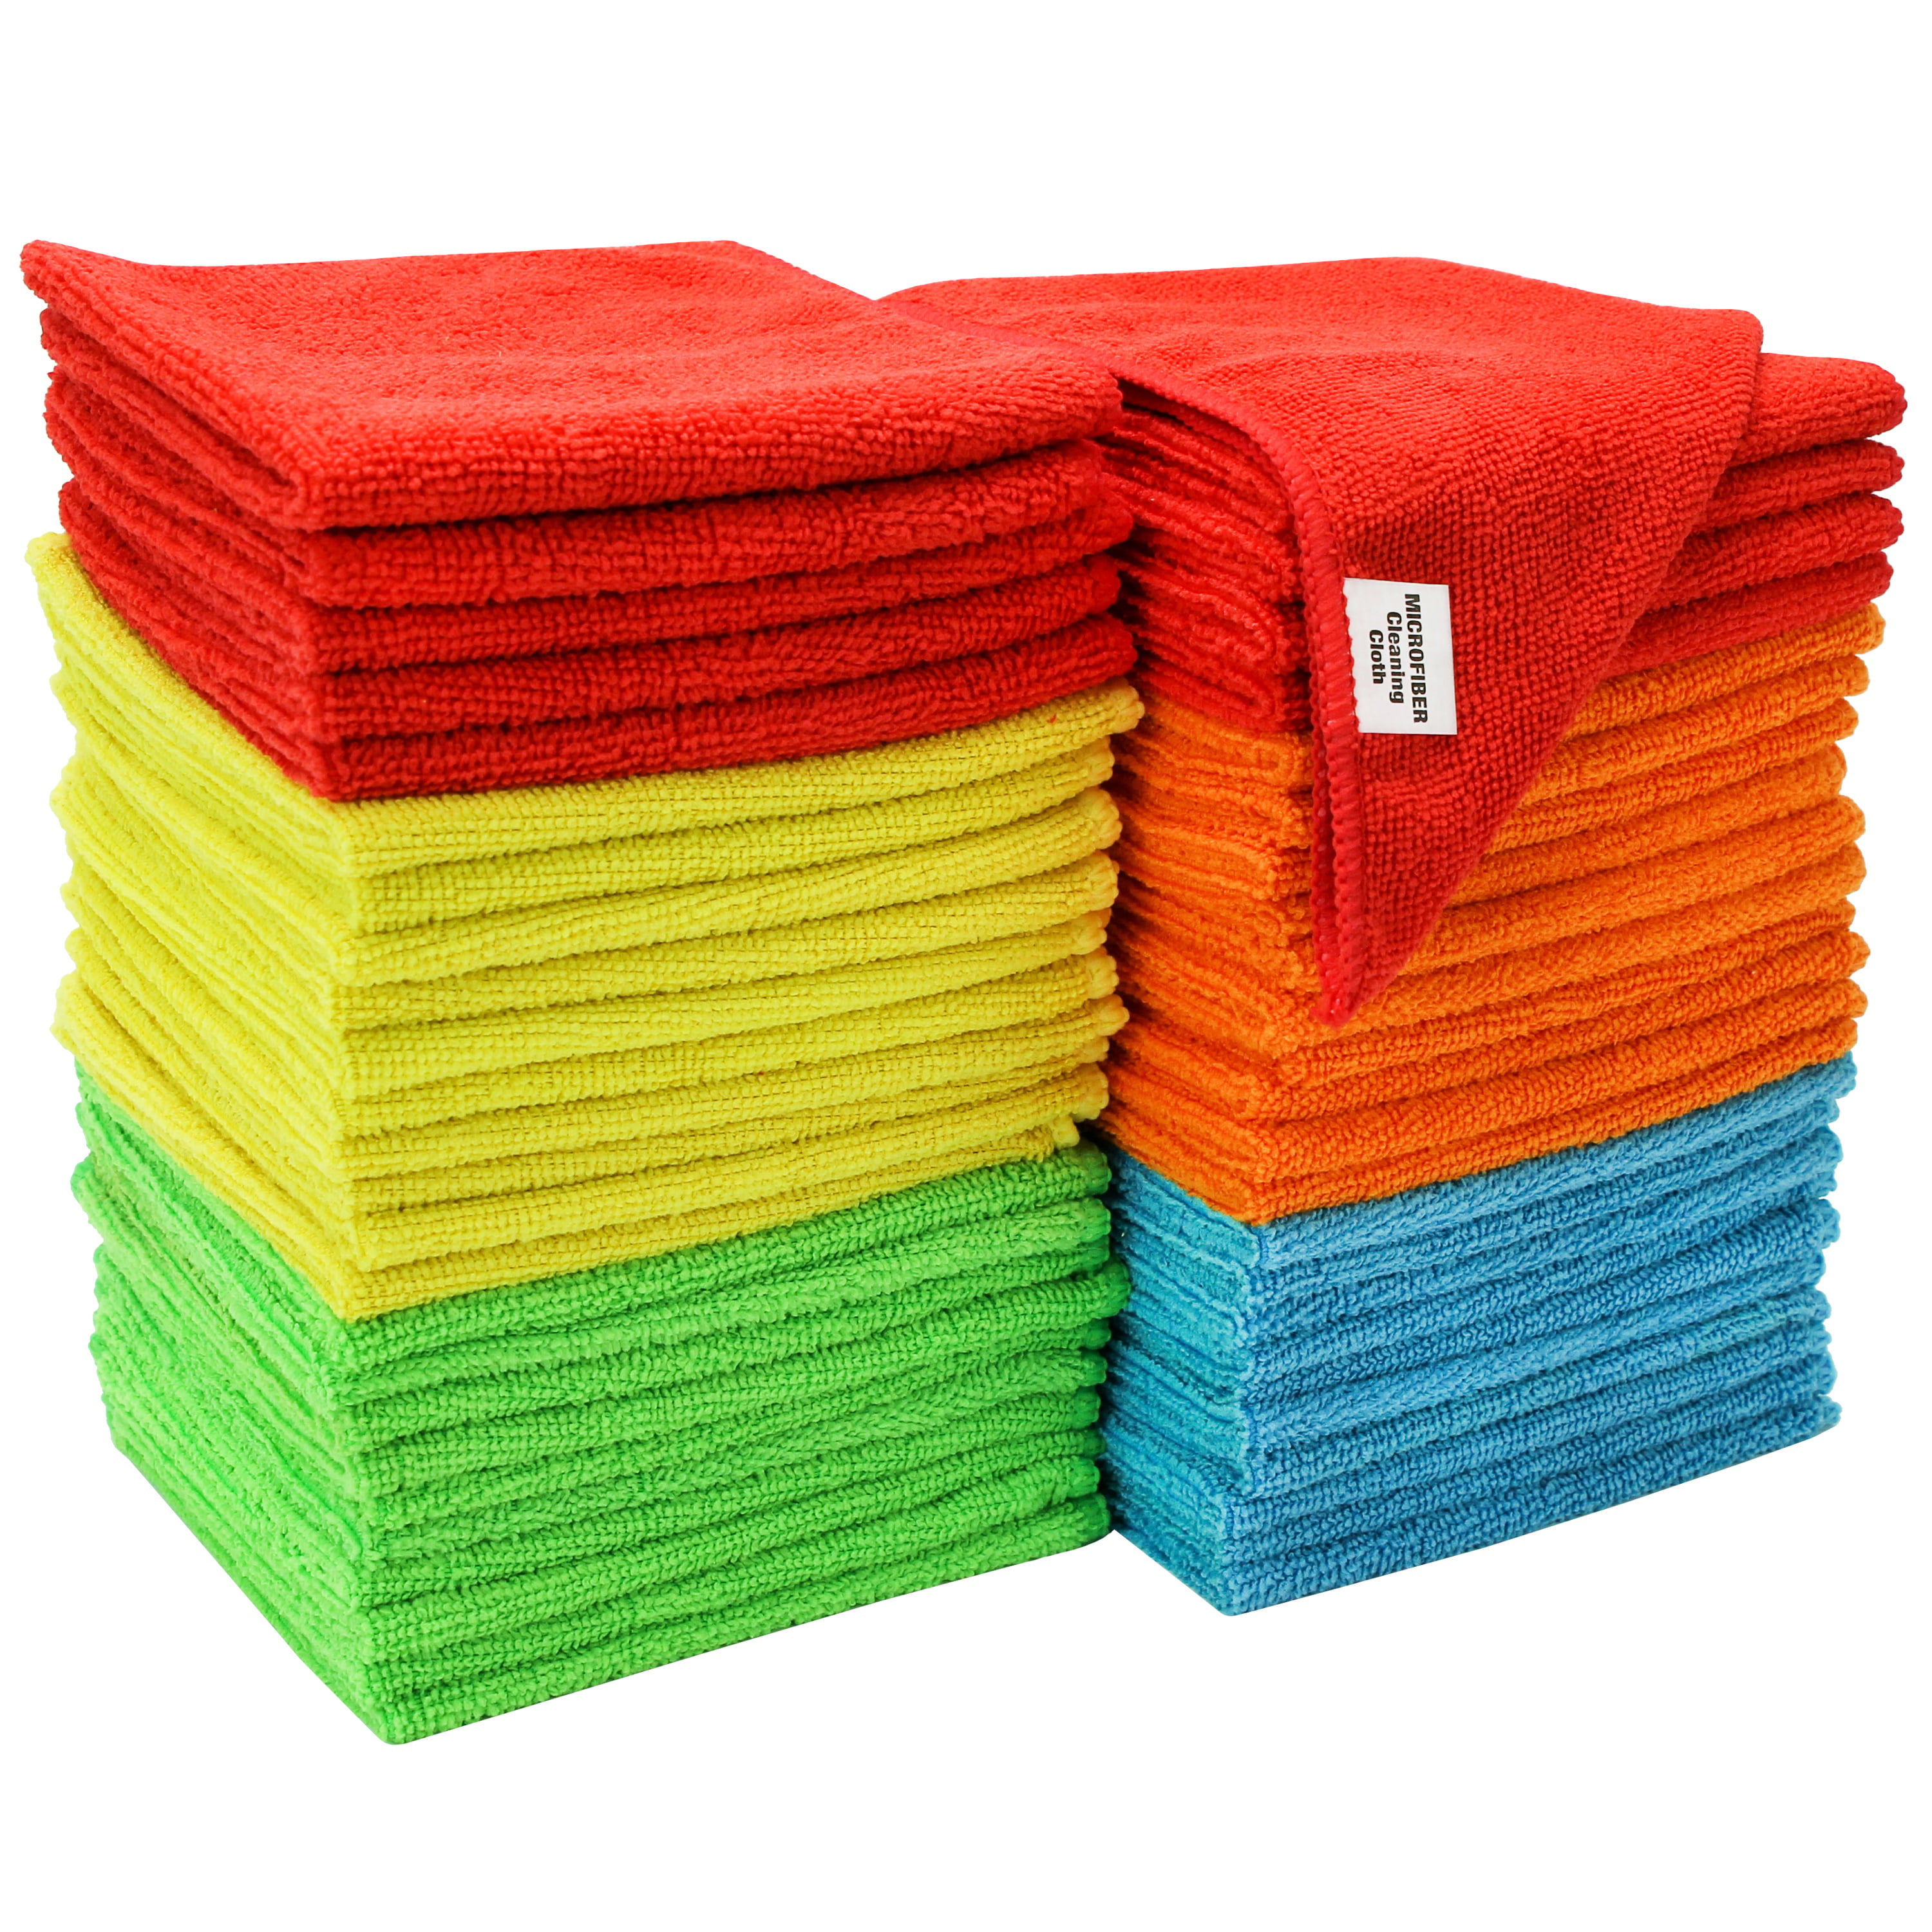 Microfiber Cleaning Cloth Highly Durable and Machine Washable 50 Pack 